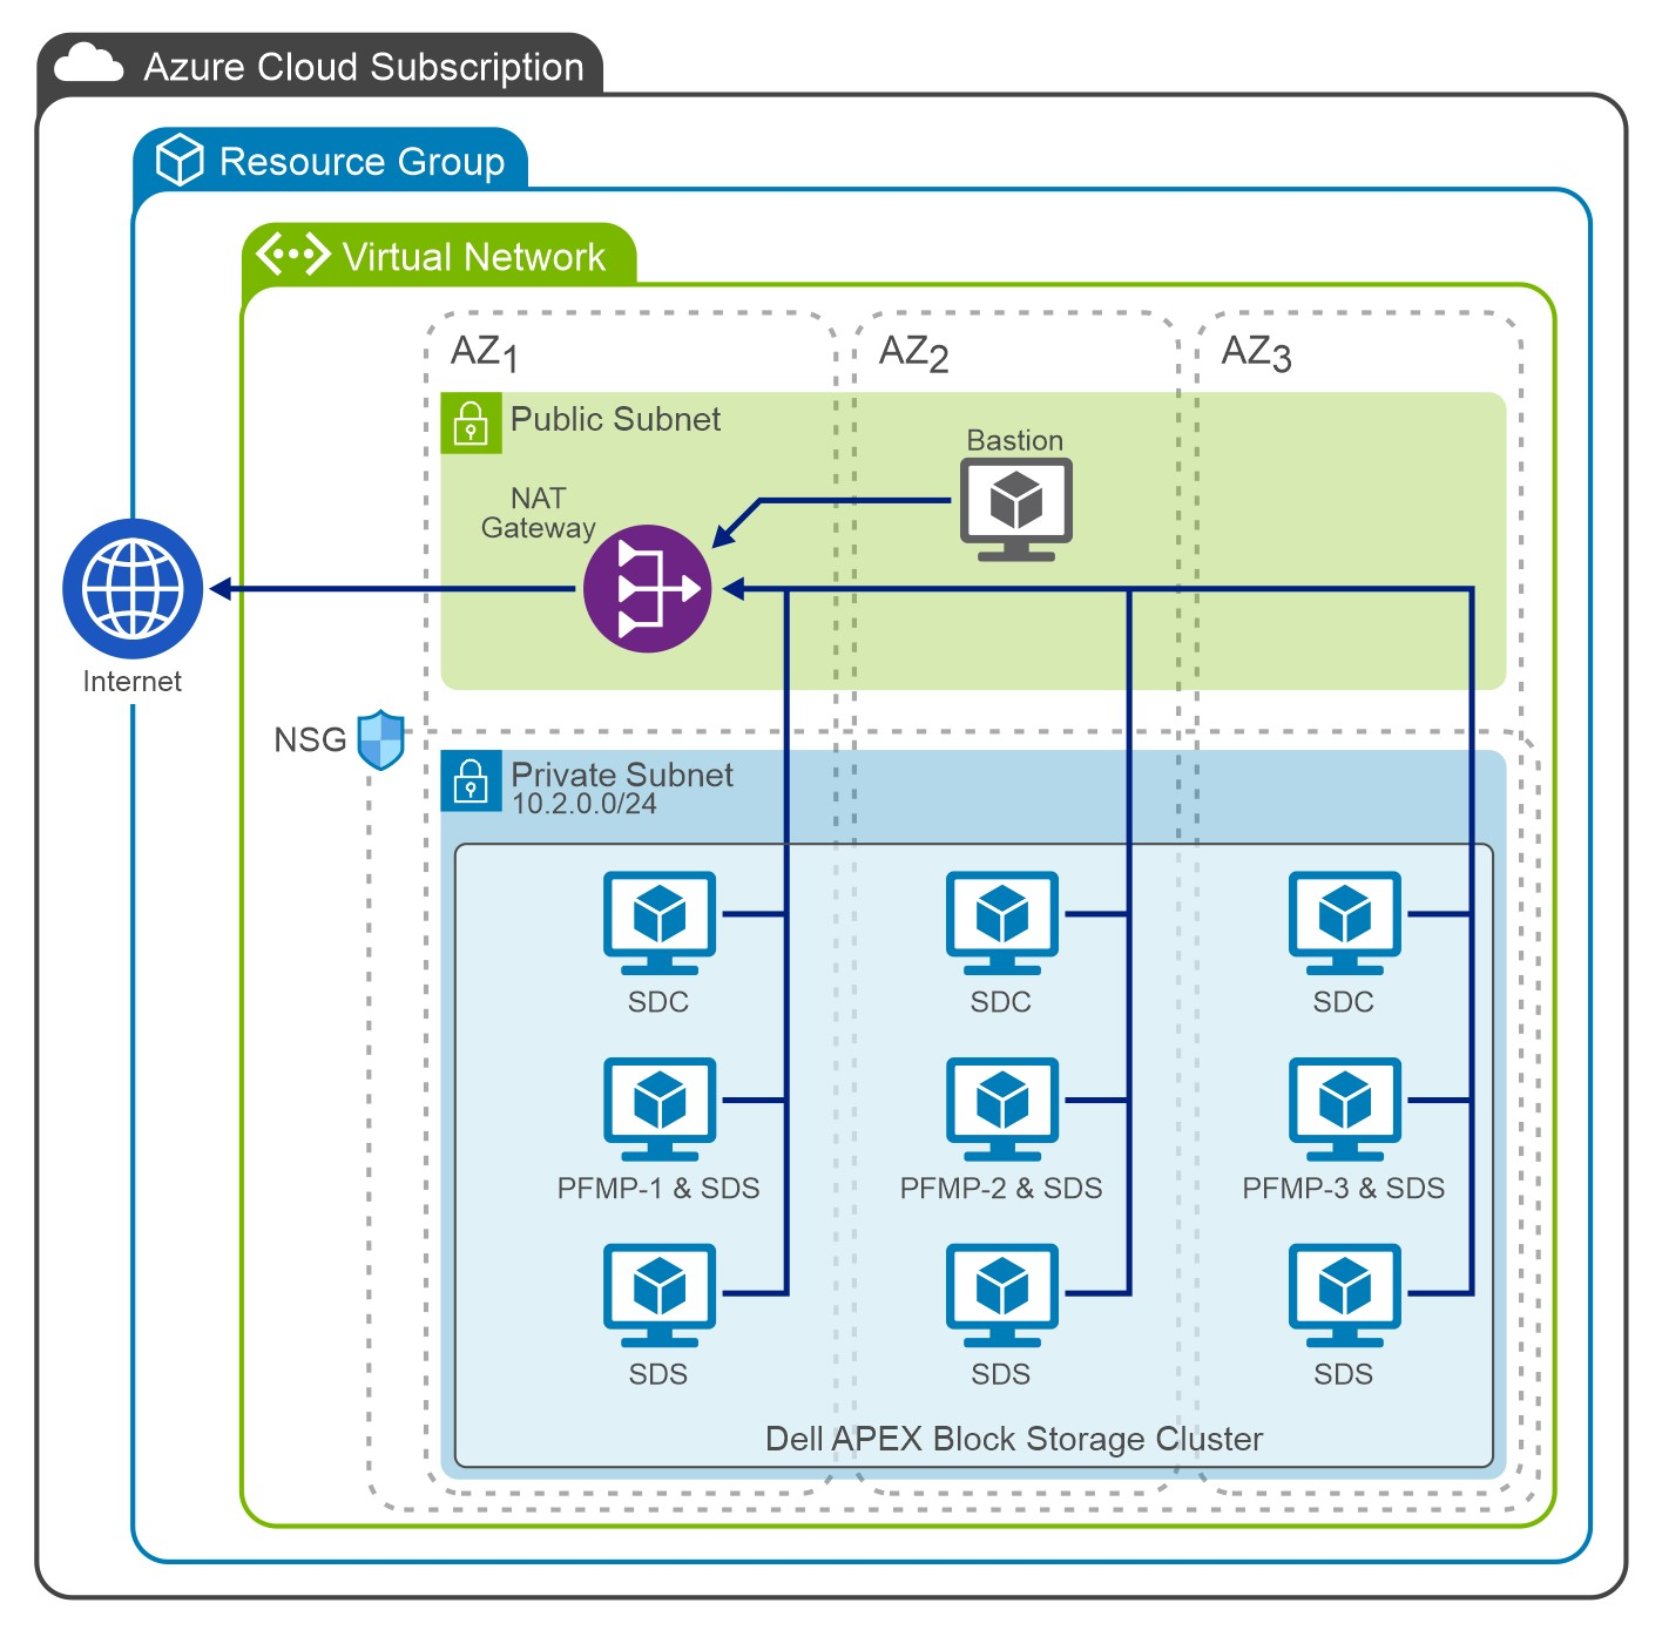 This figure shows the Dell APEX Block Storage network architecture for Azure.